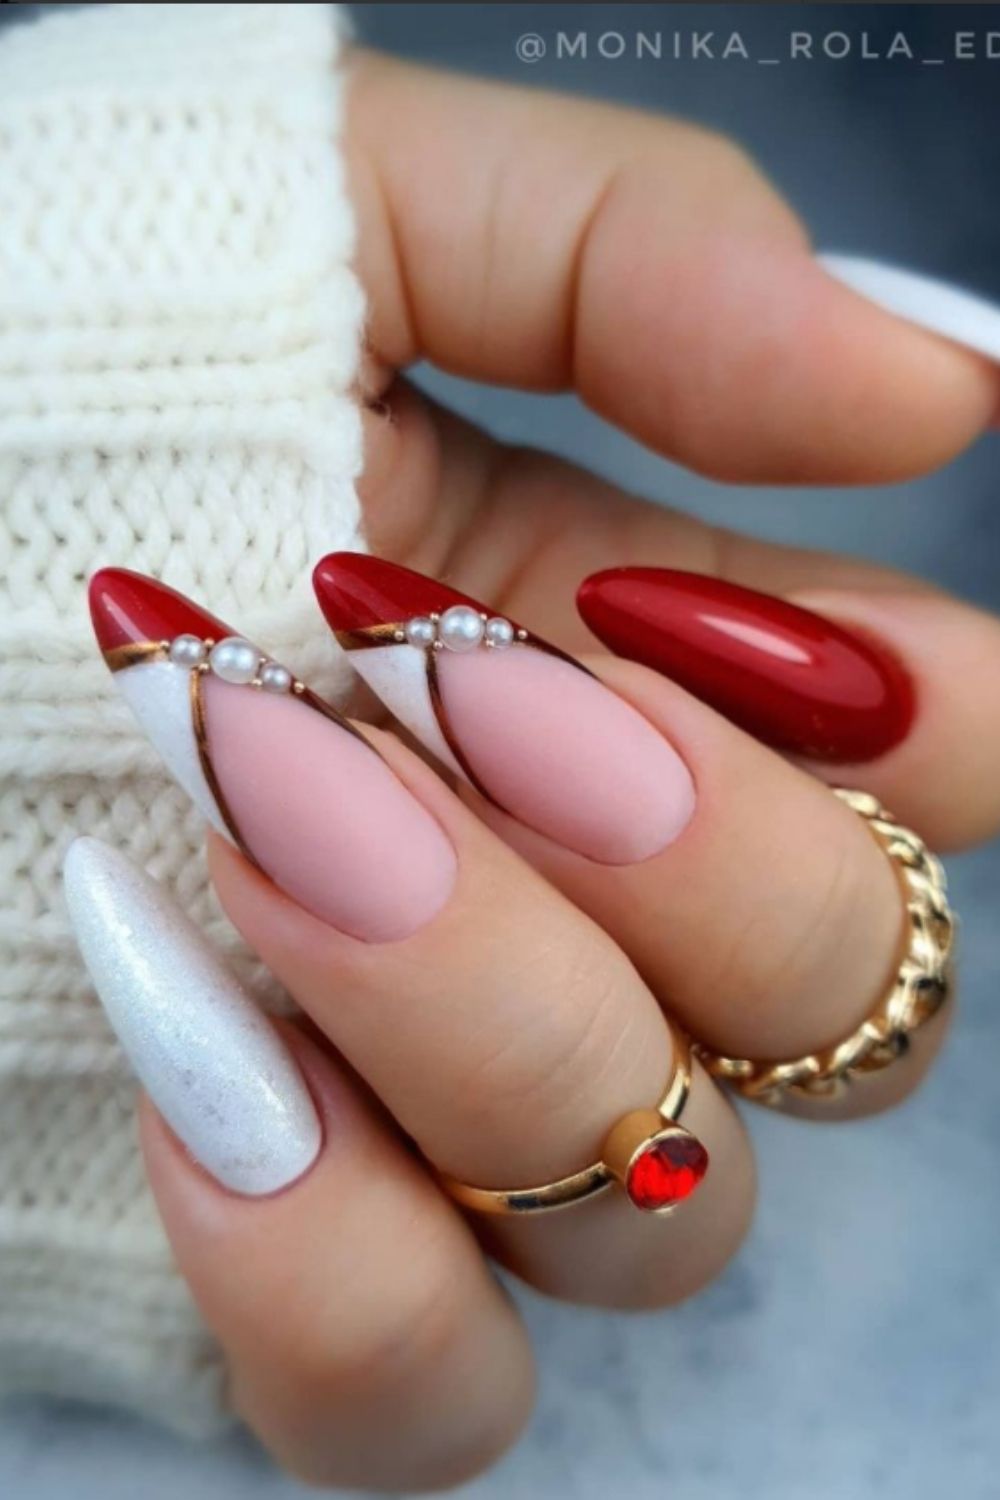 Red and white almond nails designs with pearl